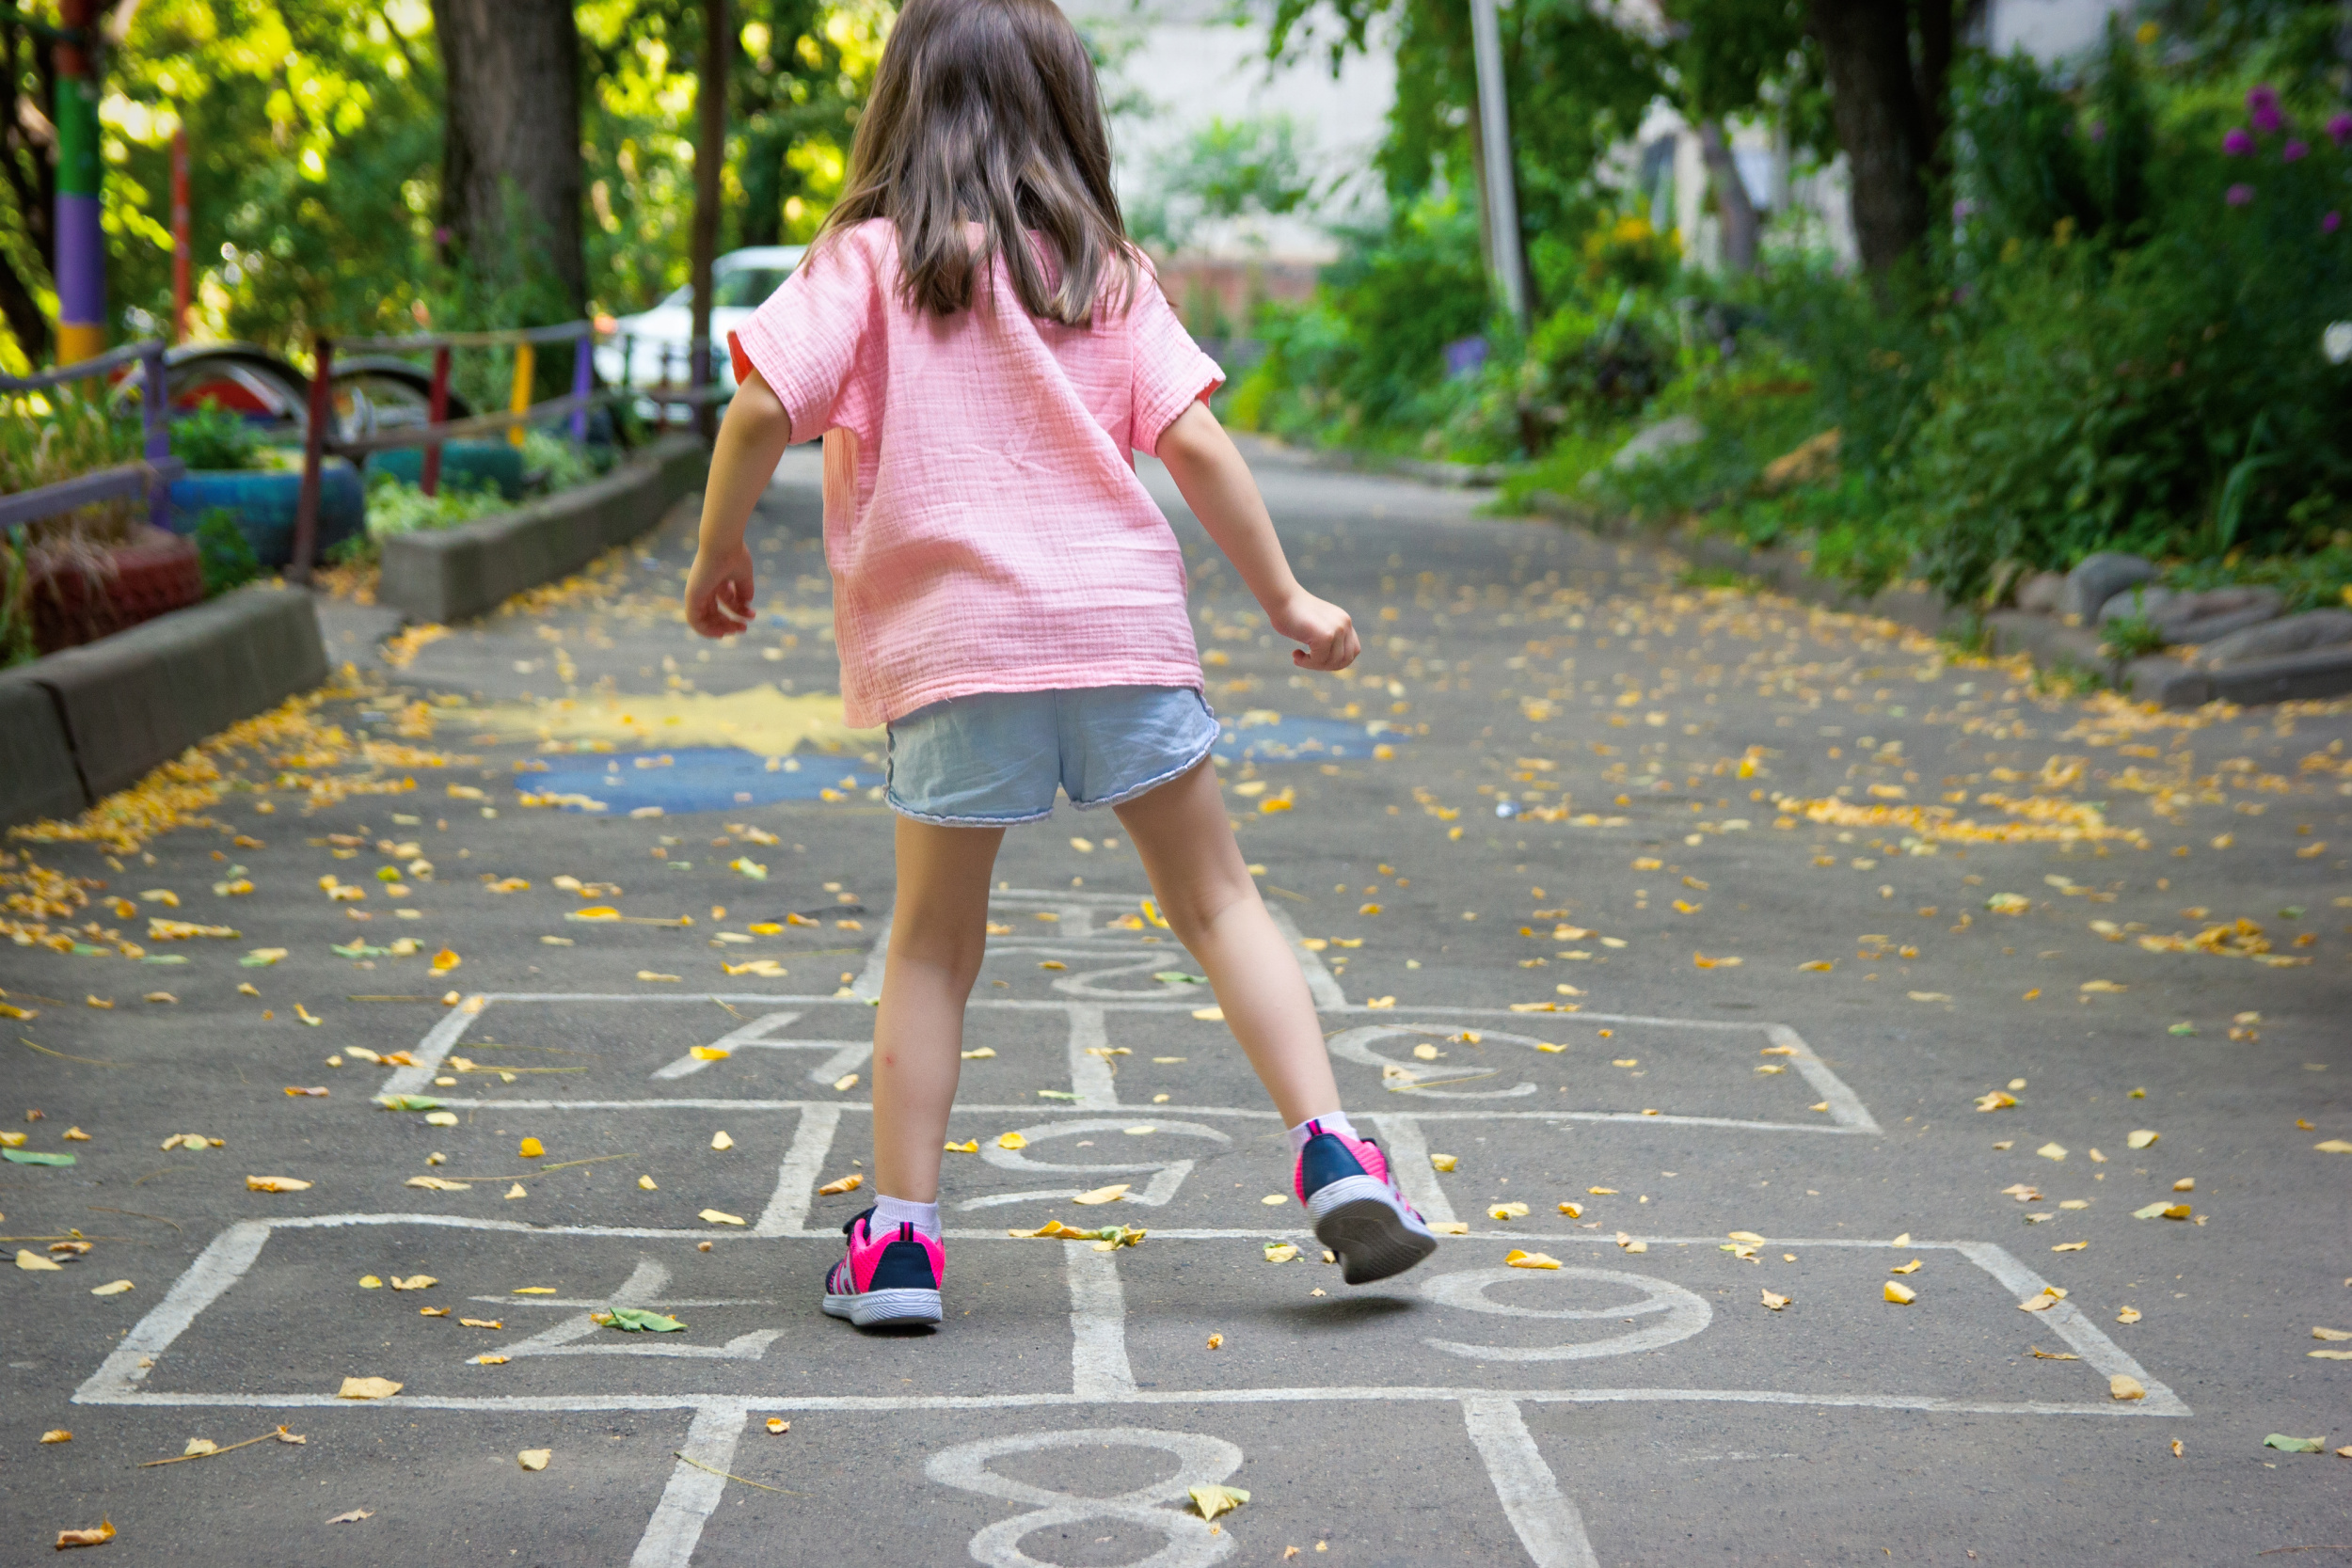 1 little-cute-girl-5-yo-playing-hopscotch-playground-outdoors-selective-soft-focus.jpg